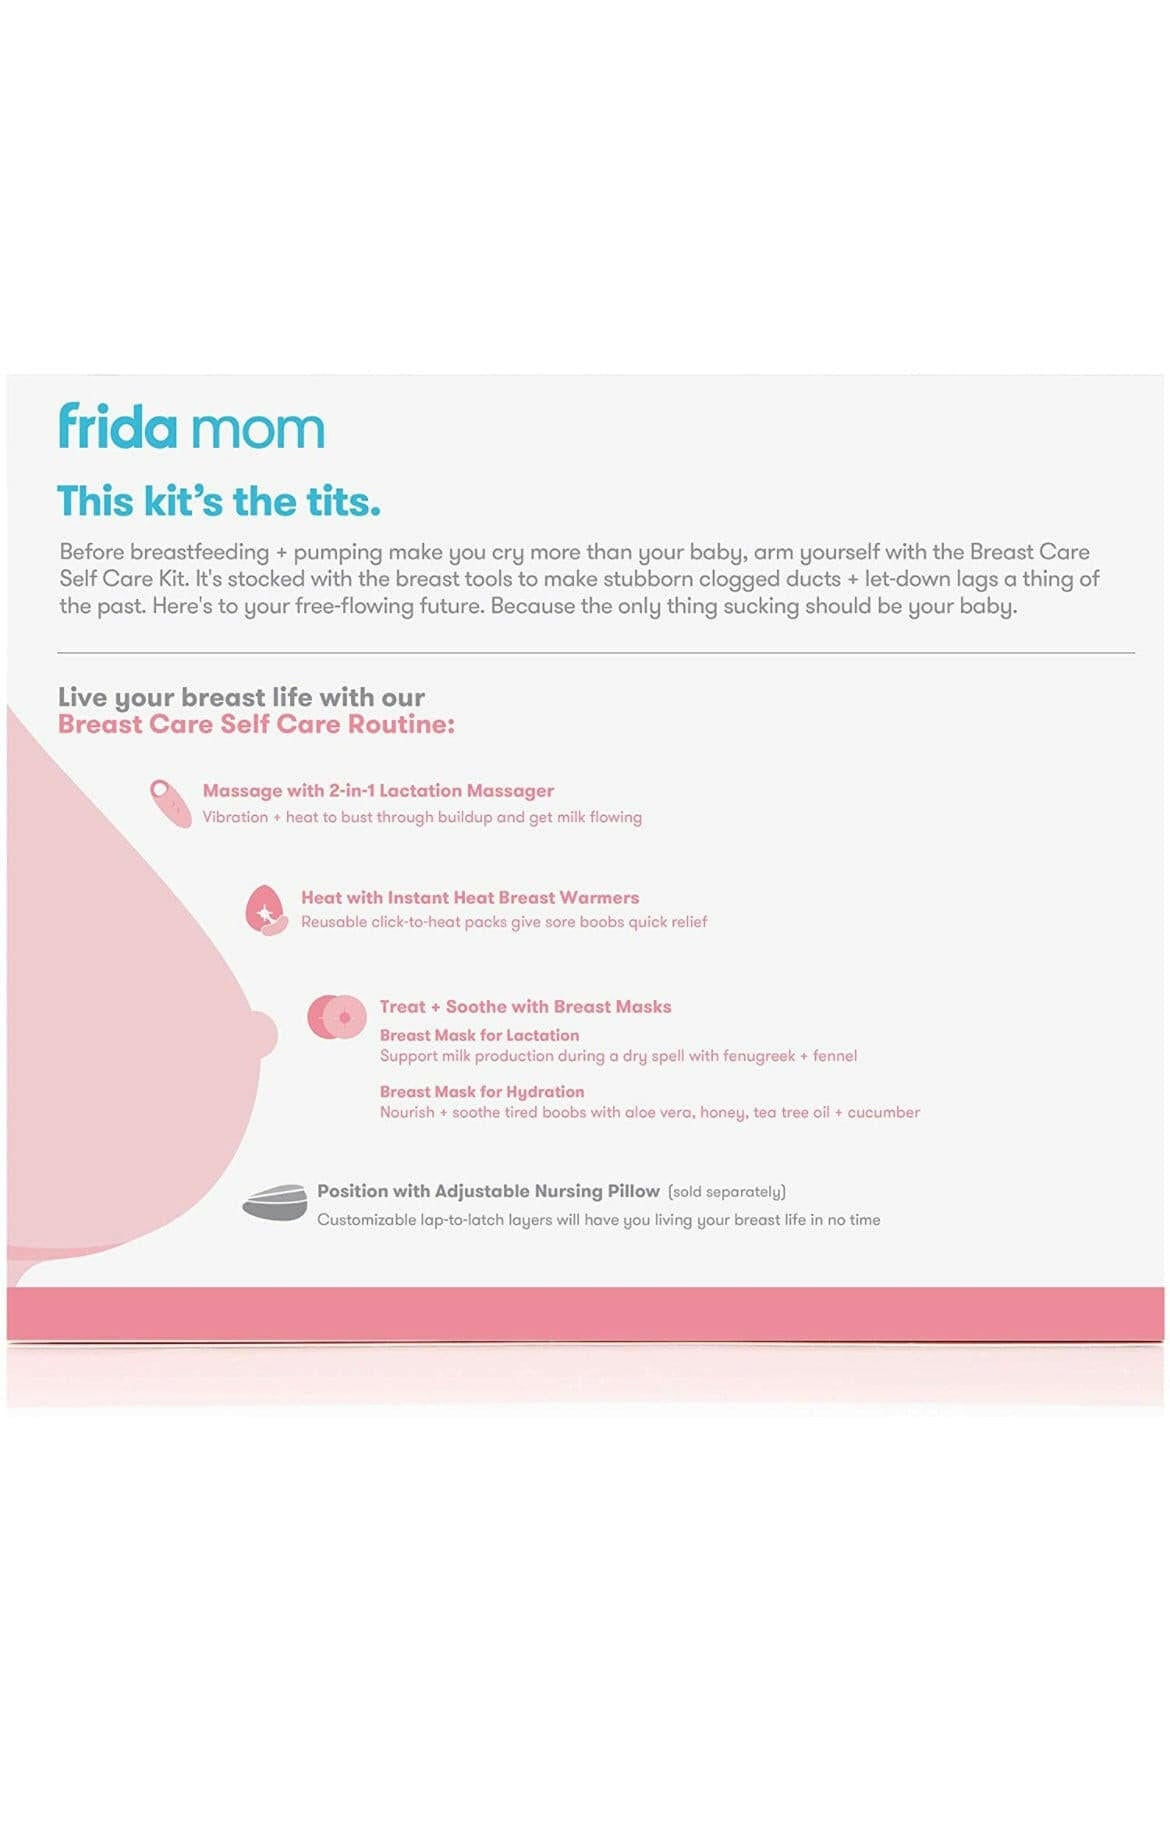 Breast Care Kit 9 PC, 2-in-1 Lactation Massager, Breast Warmers, Breast Mask for Hydration and Lactation by Frida Mom.